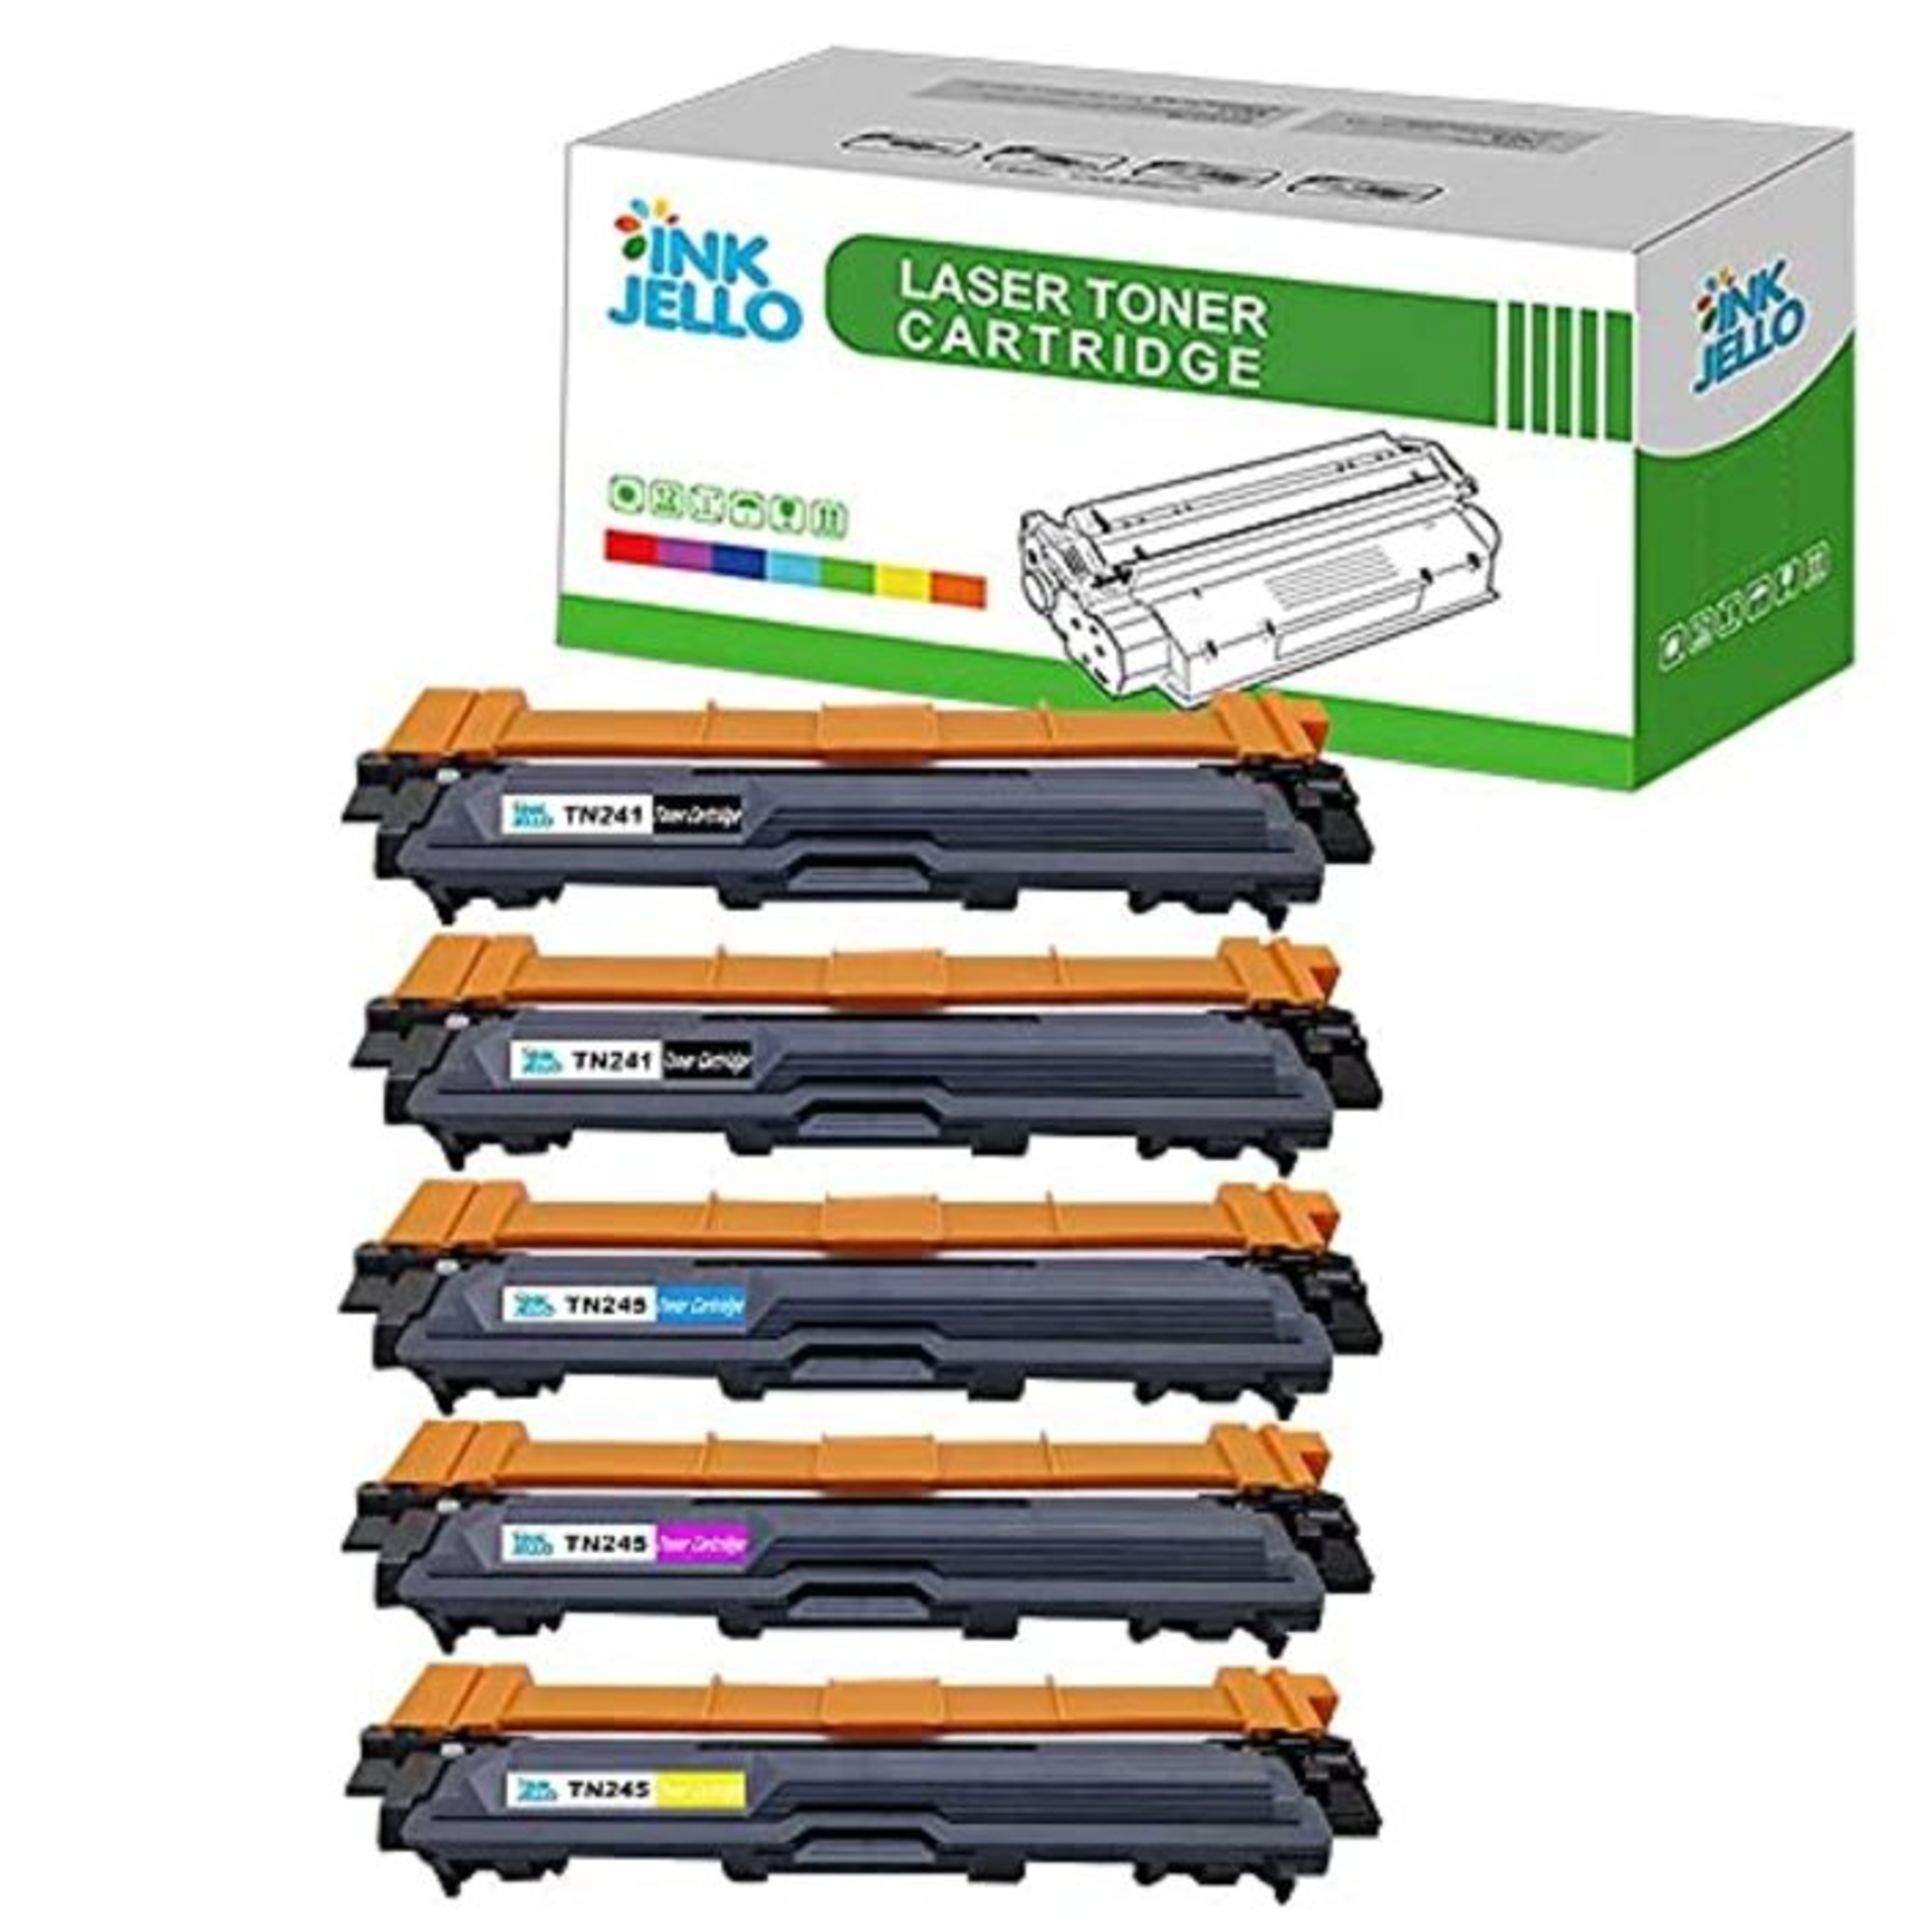 InkJello Compatible Toner Cartridge Replacement for Brother DCP-9015CDW DCP-9020CDW HL